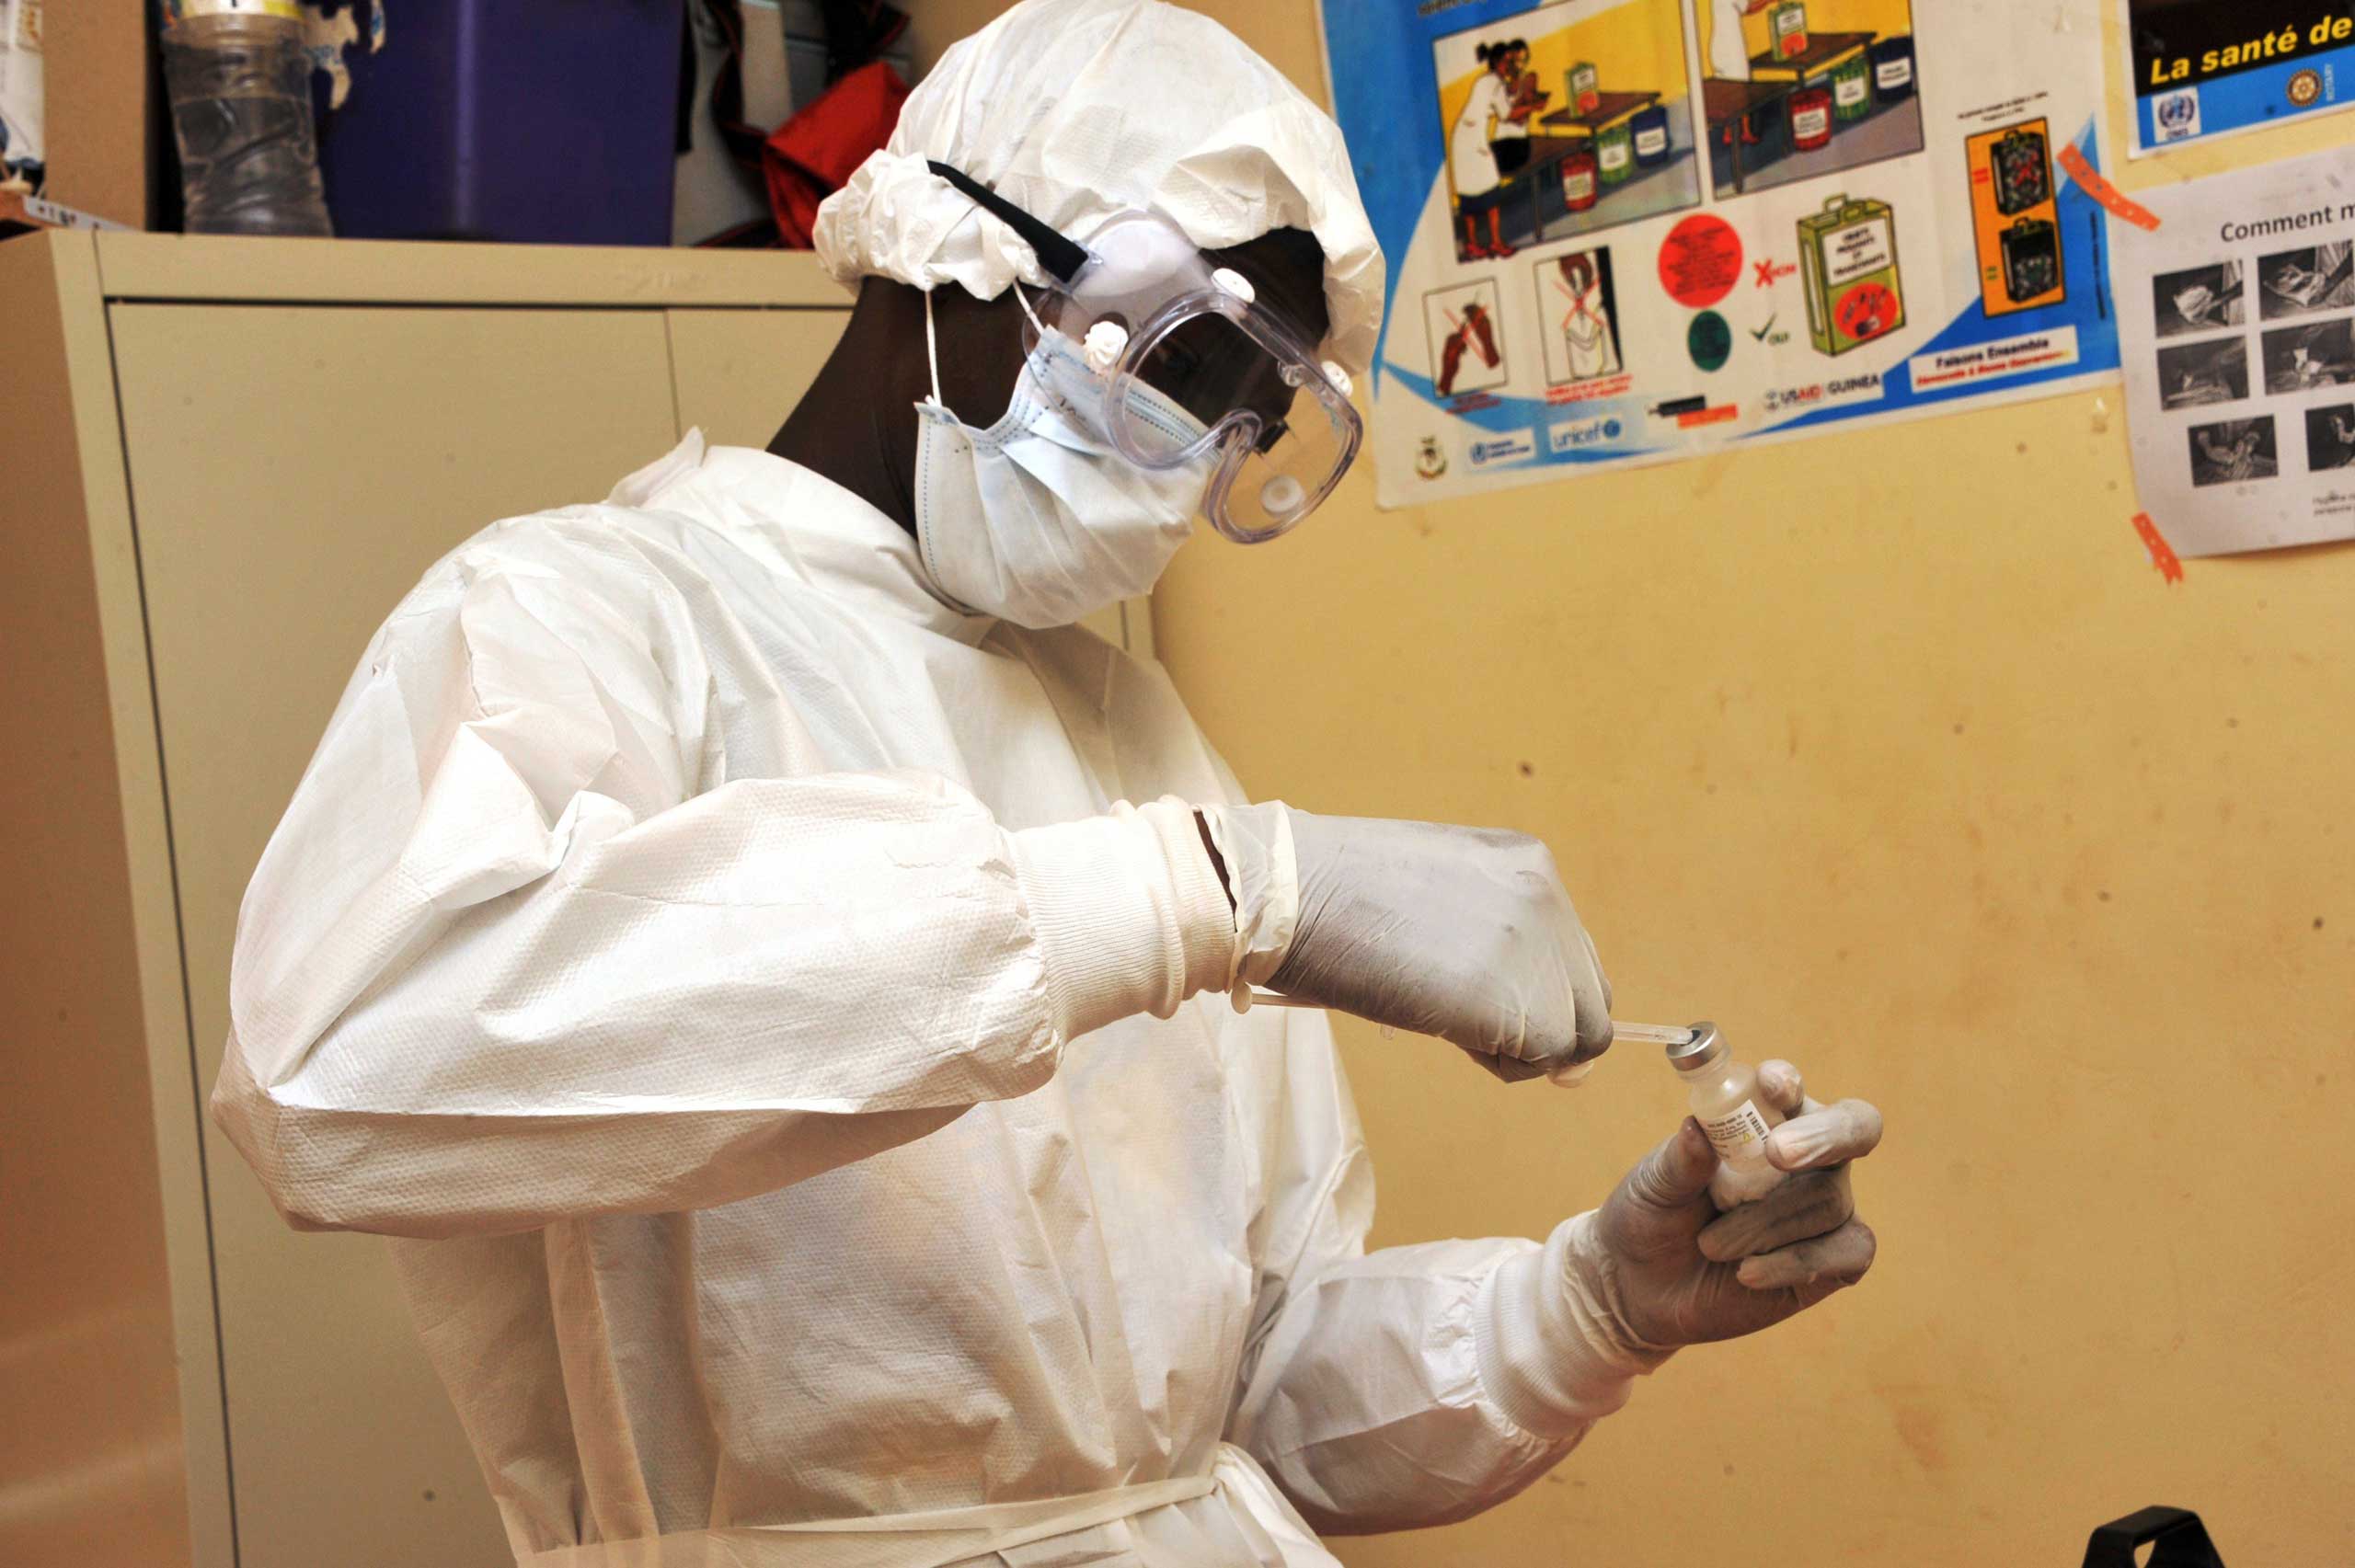 A health worker prepares a vaccination on March 10, 2015 at a health center in Conakry during the first clinical trials of the VSV-EBOV vaccine against the Ebola virus. (CELLOU BINANI
                      Cellou Binani—AFP/Getty)